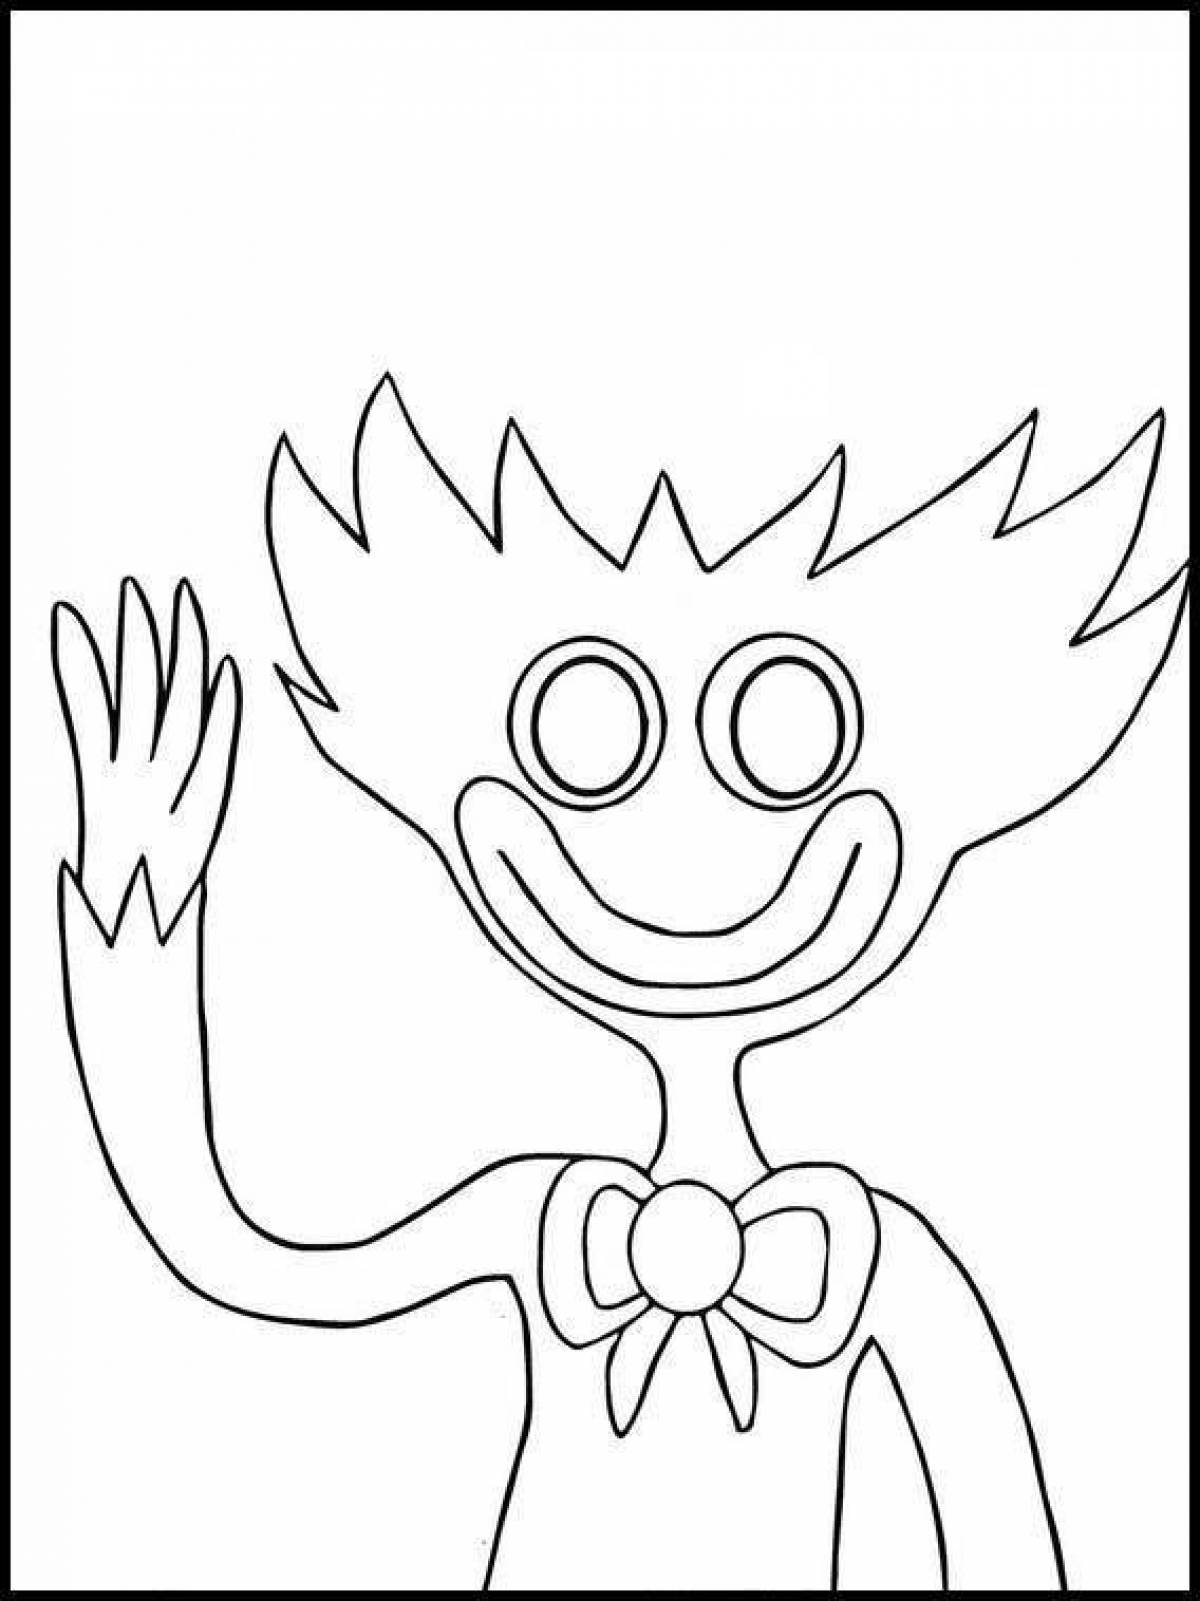 Happy poppy coloring page